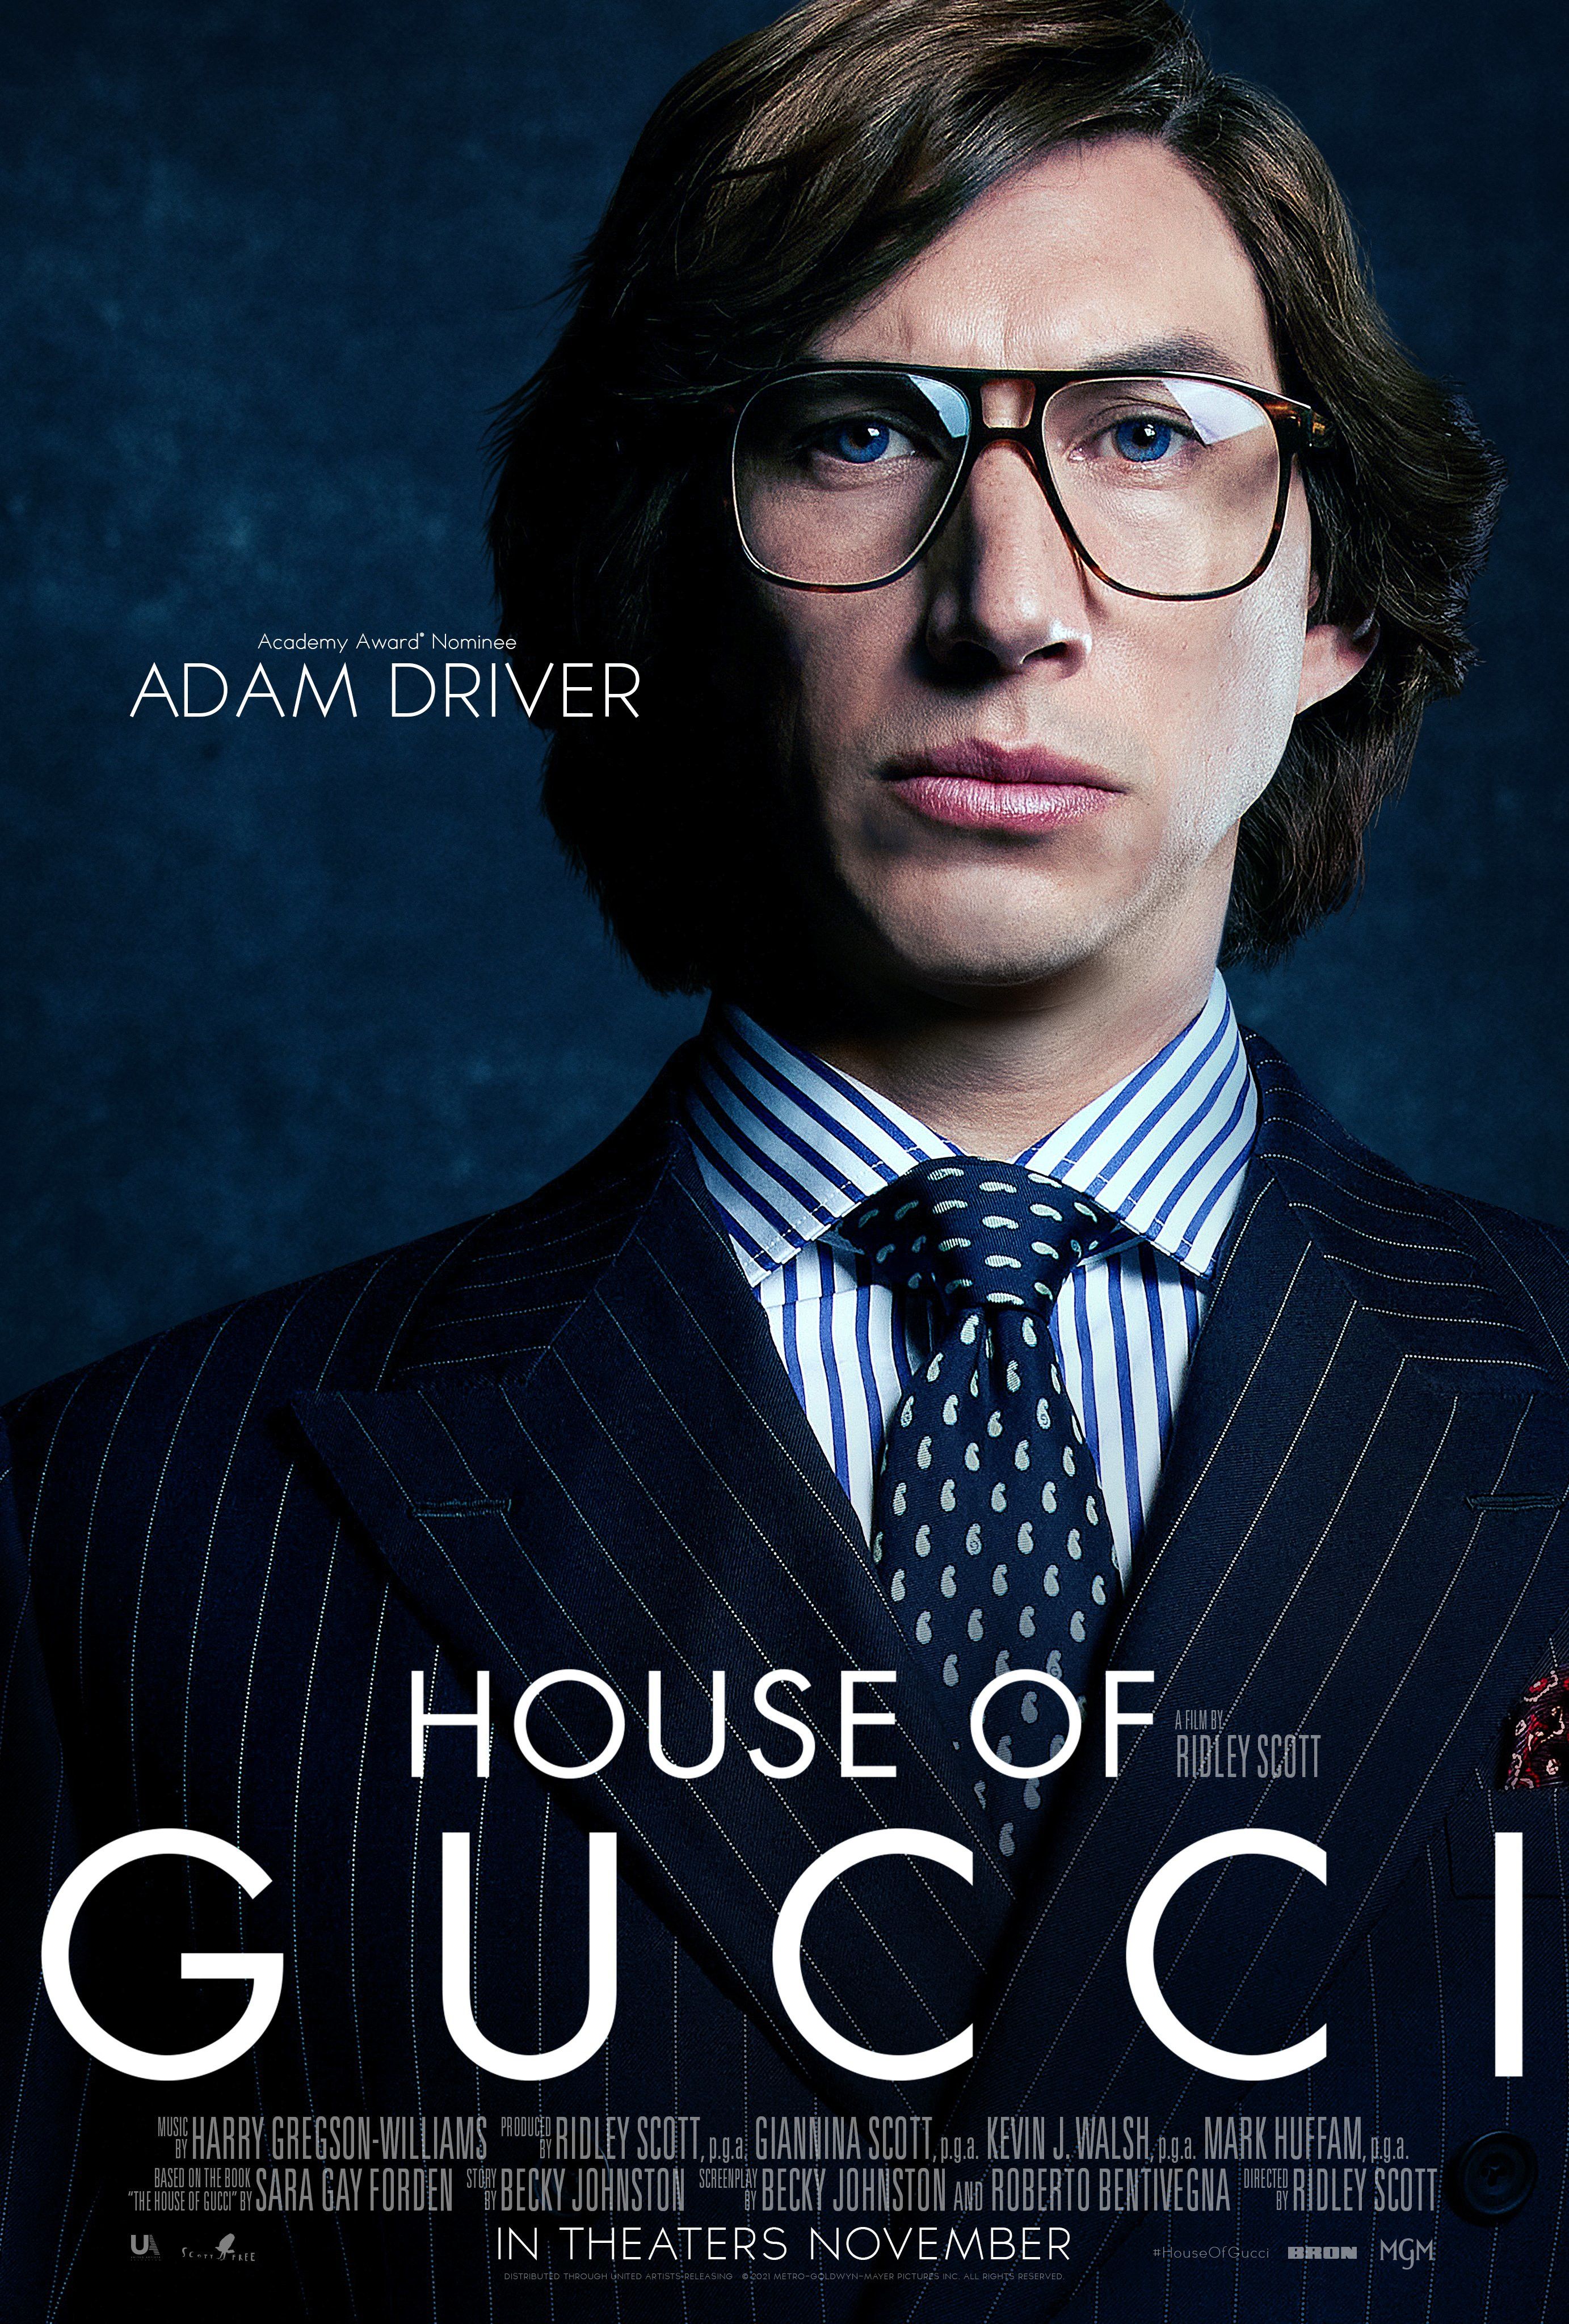 Gucci Movie Character Posters Highlight Jared Letos Ridiculous ...